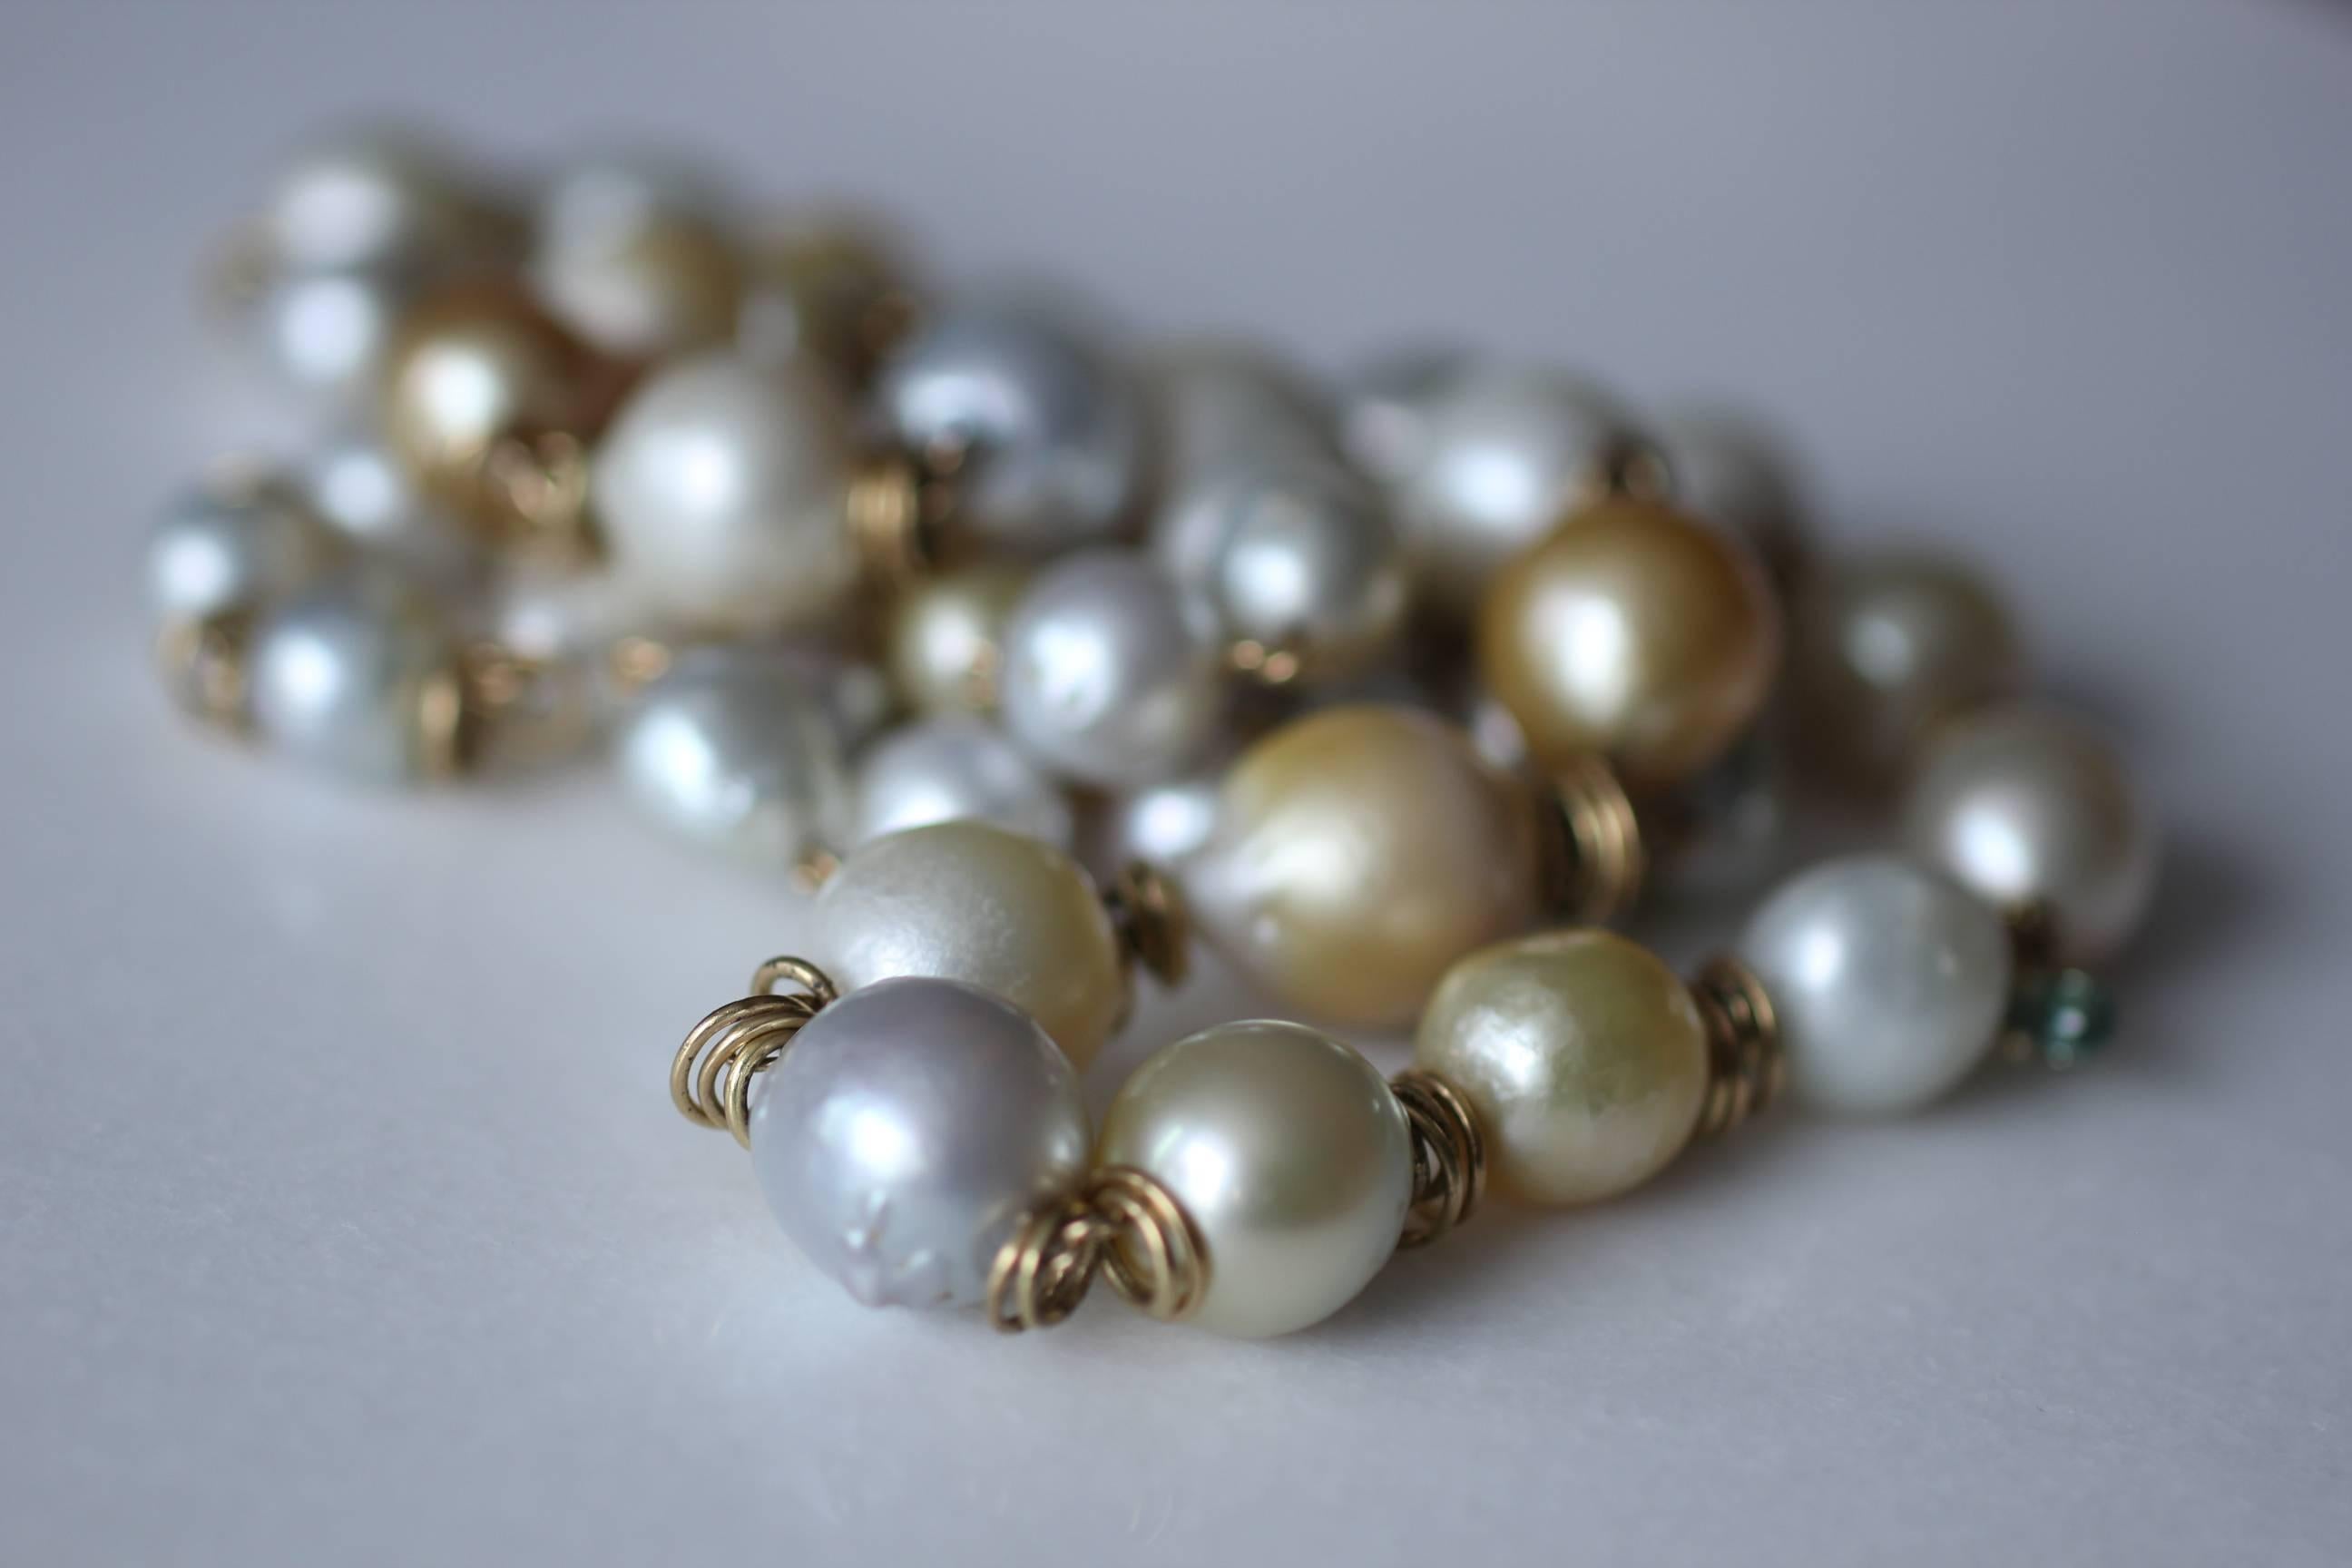 Sunlight Pearl Necklace is a beautifully versatile beaded link necklace. Bright lustrous white and golden baroque pearls ranging in size 10mm-17.5mm are wrapped in 18k gold and separated by 18k gold links. The necklace is terminated in 18k gold